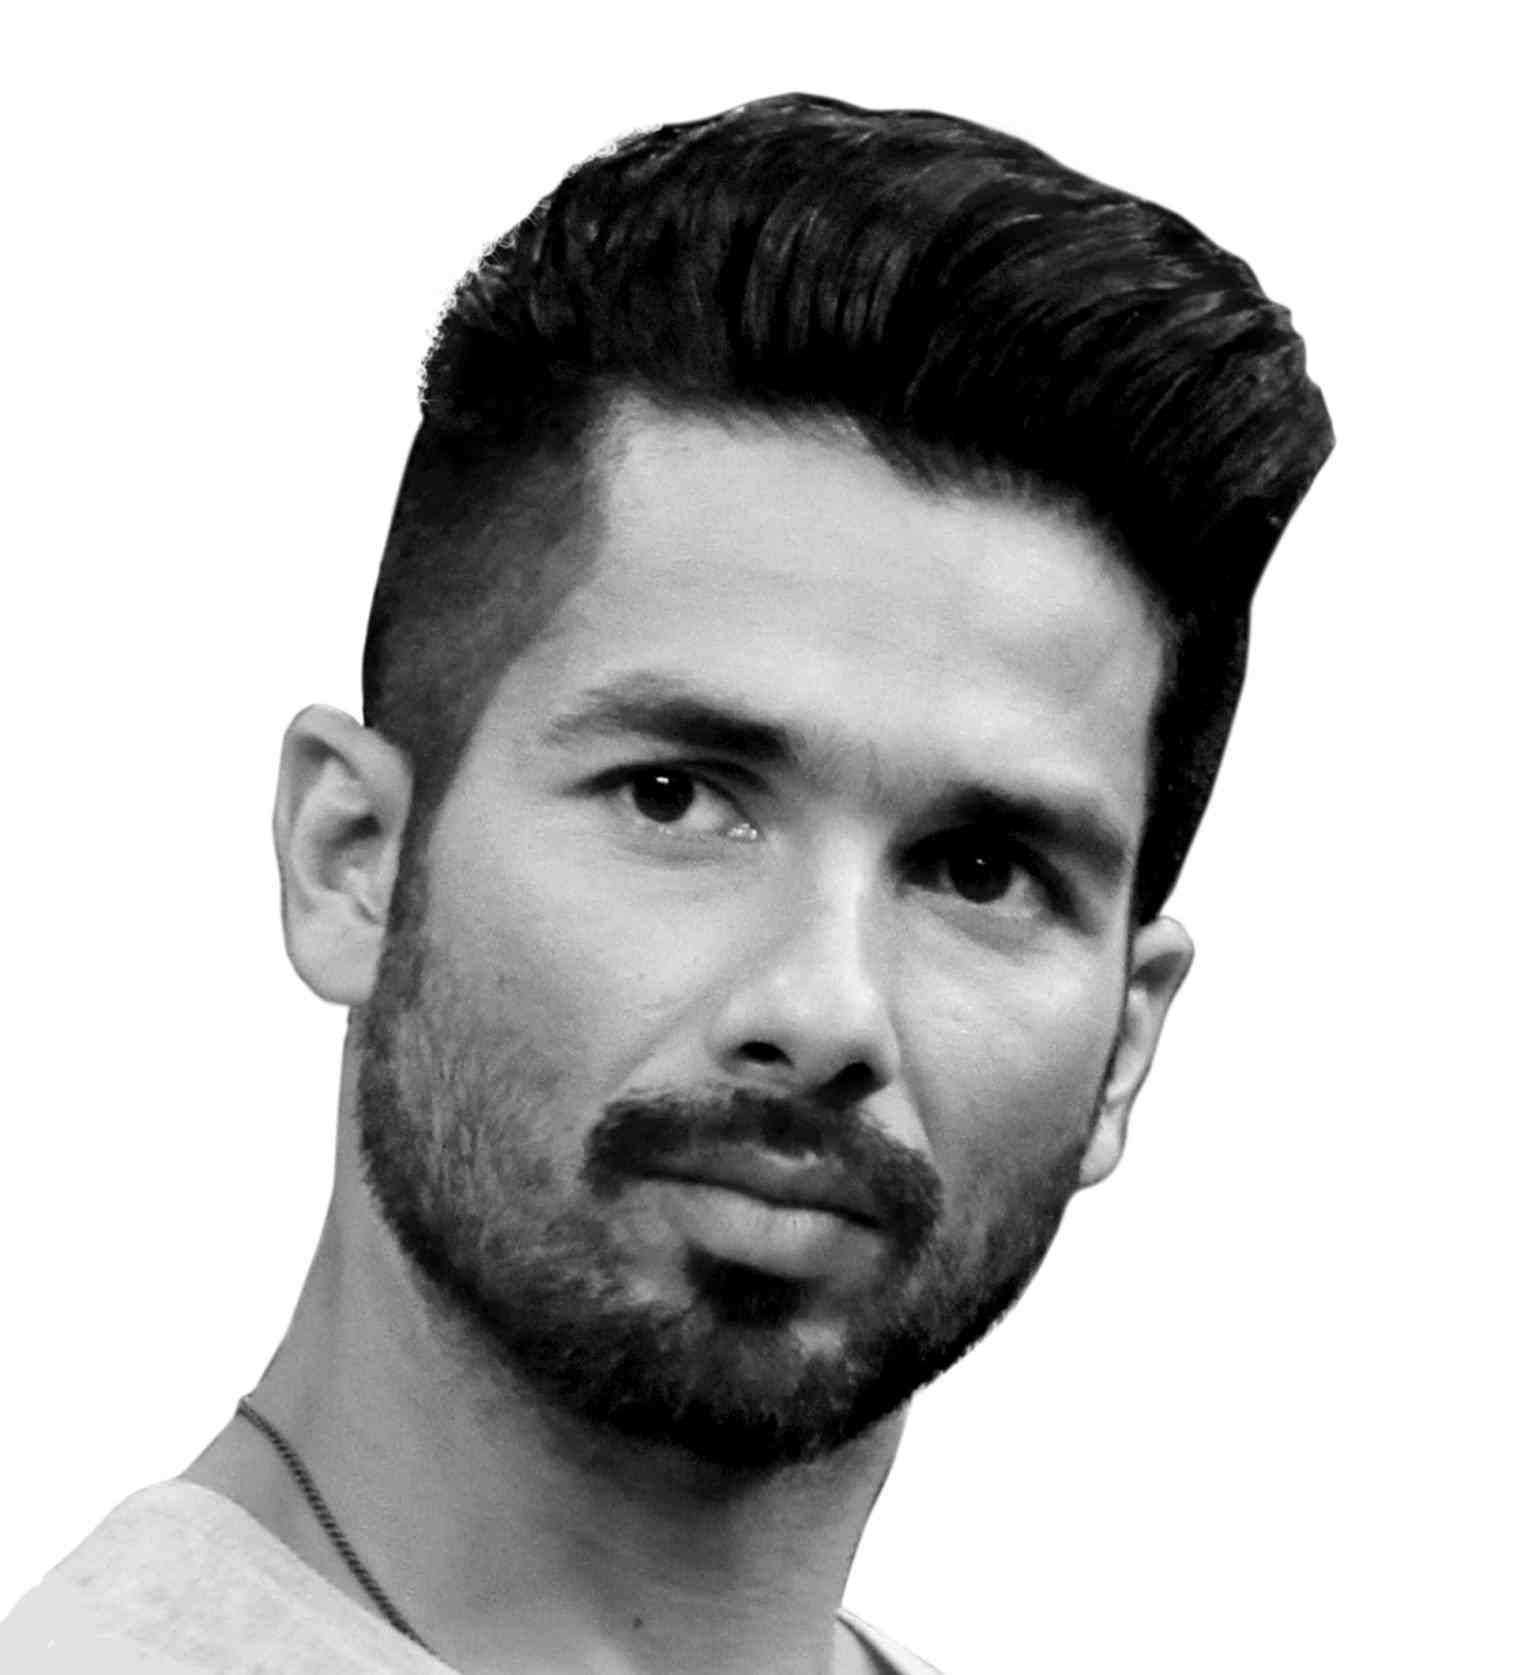 Hairstyle Of Shahid Kapoor 2017 | Men Haircut Styles, Mens pertaining to Indian Hairstyle Boy 2017